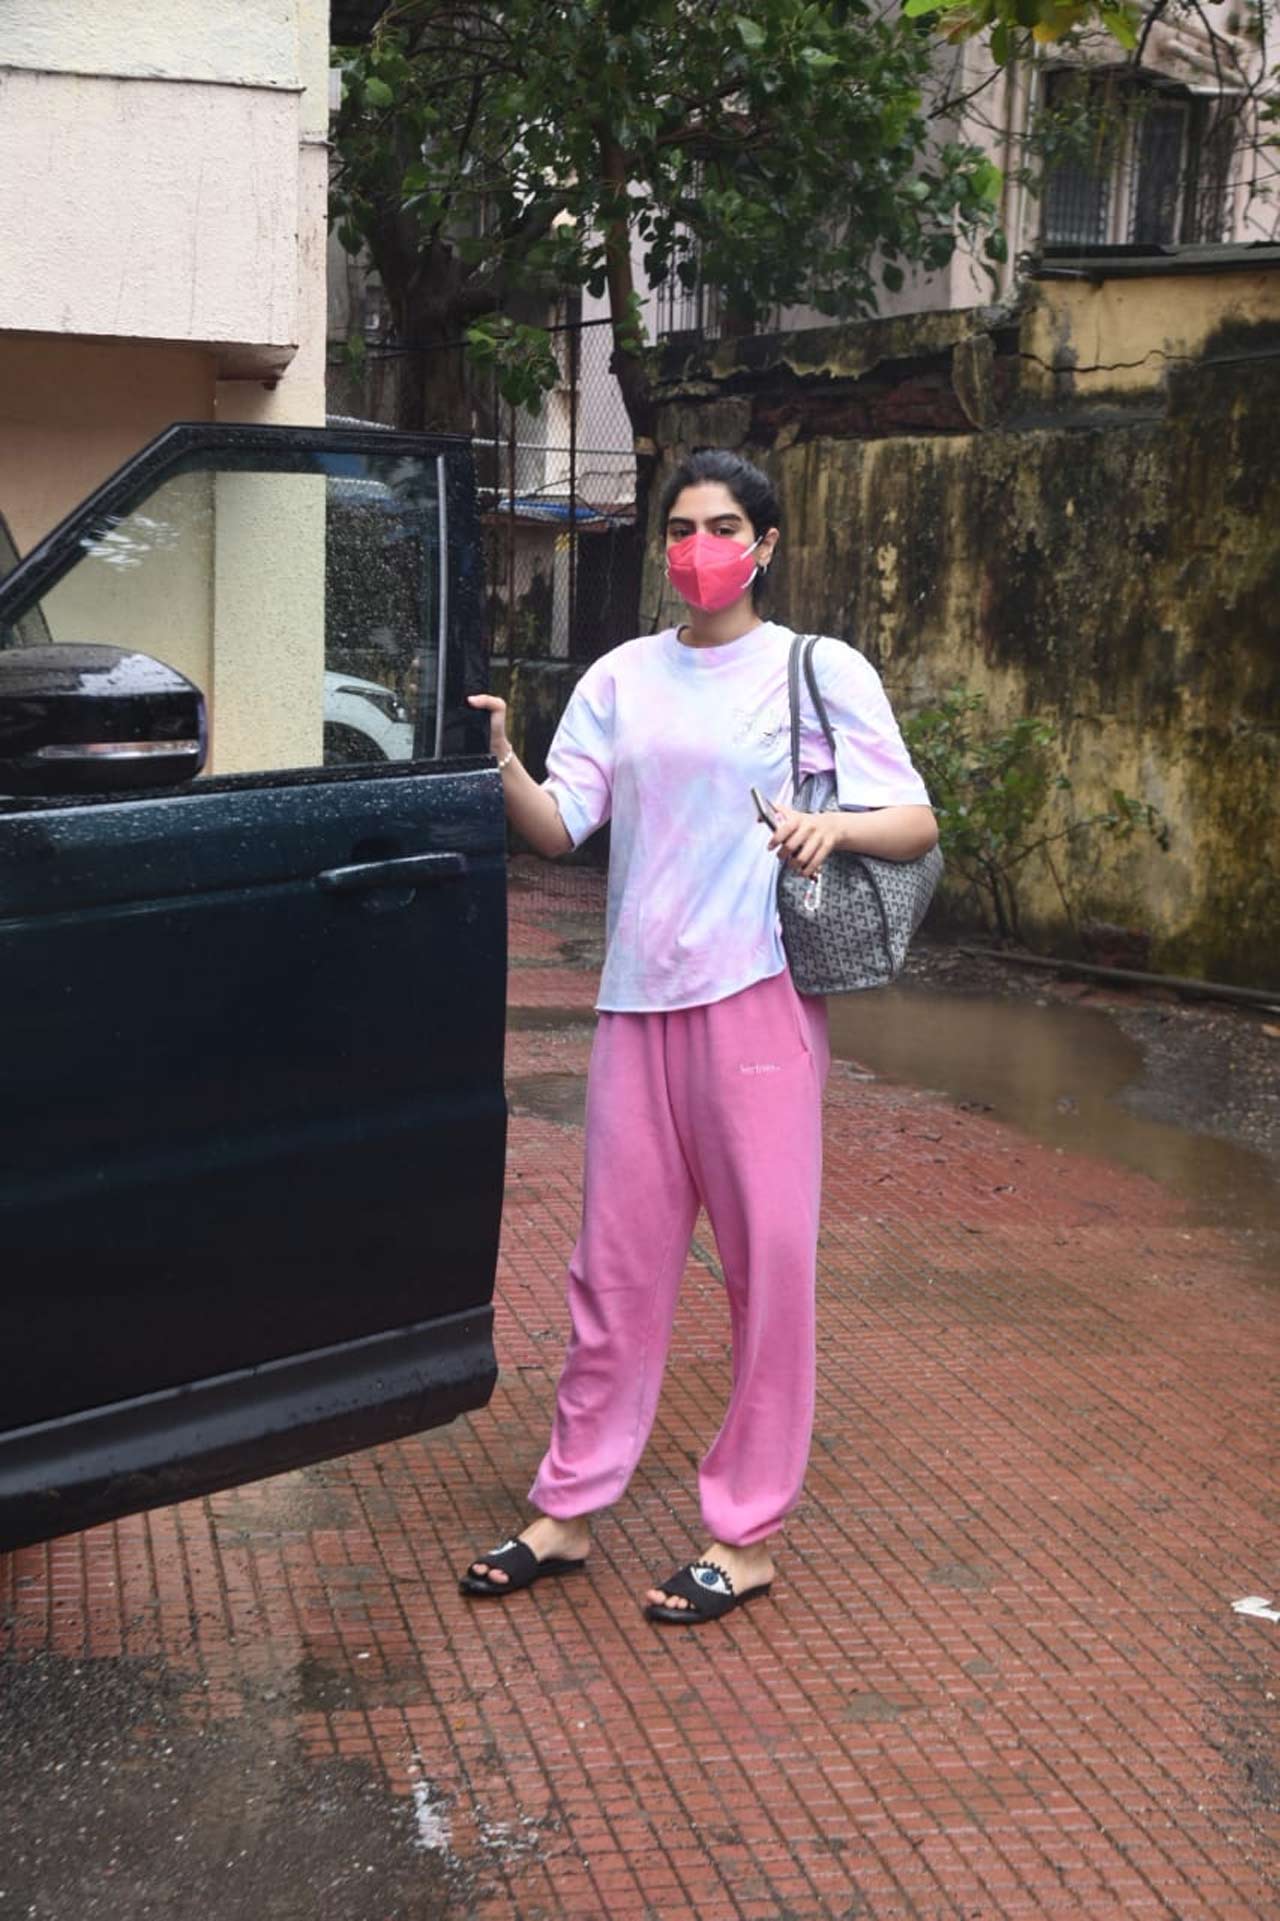 Khushi Kapoor, who is said to make her Bollywood debut soon, was snapped at a gym in pink track pants and a white tank top.